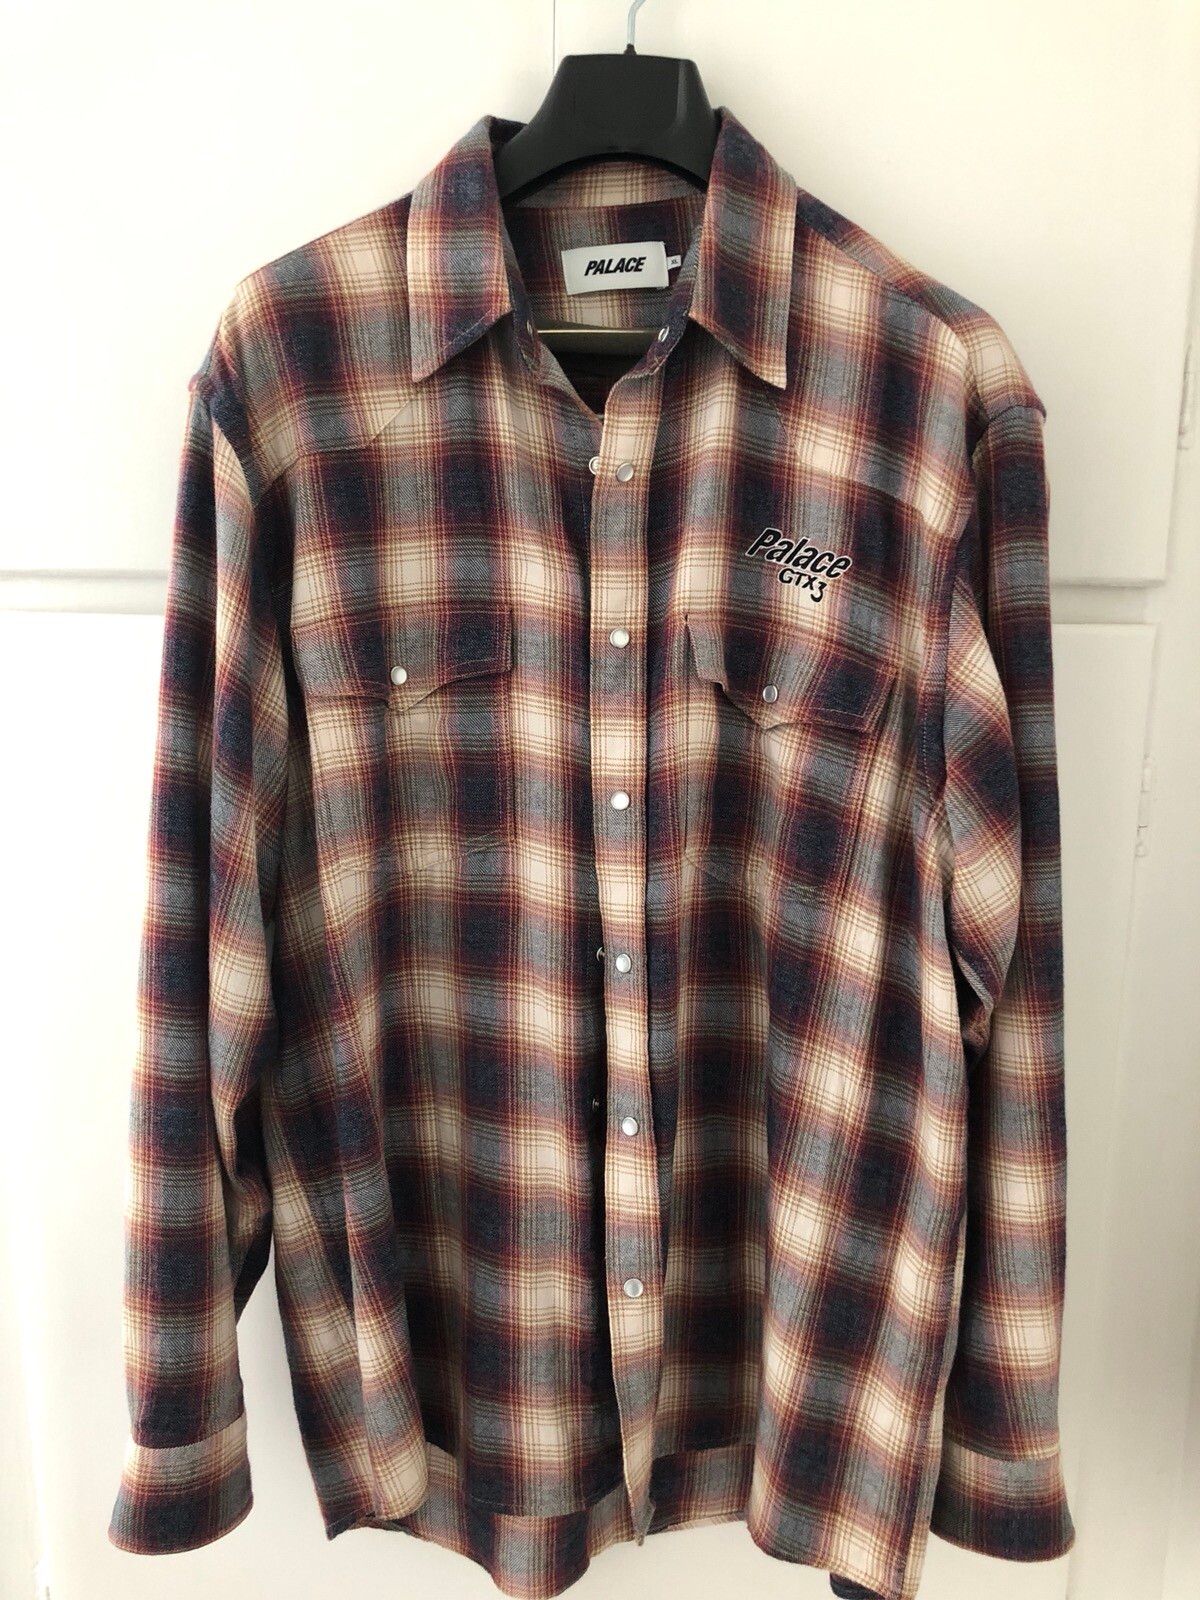 Palace Palace Gtx Flannel Shirt | Grailed